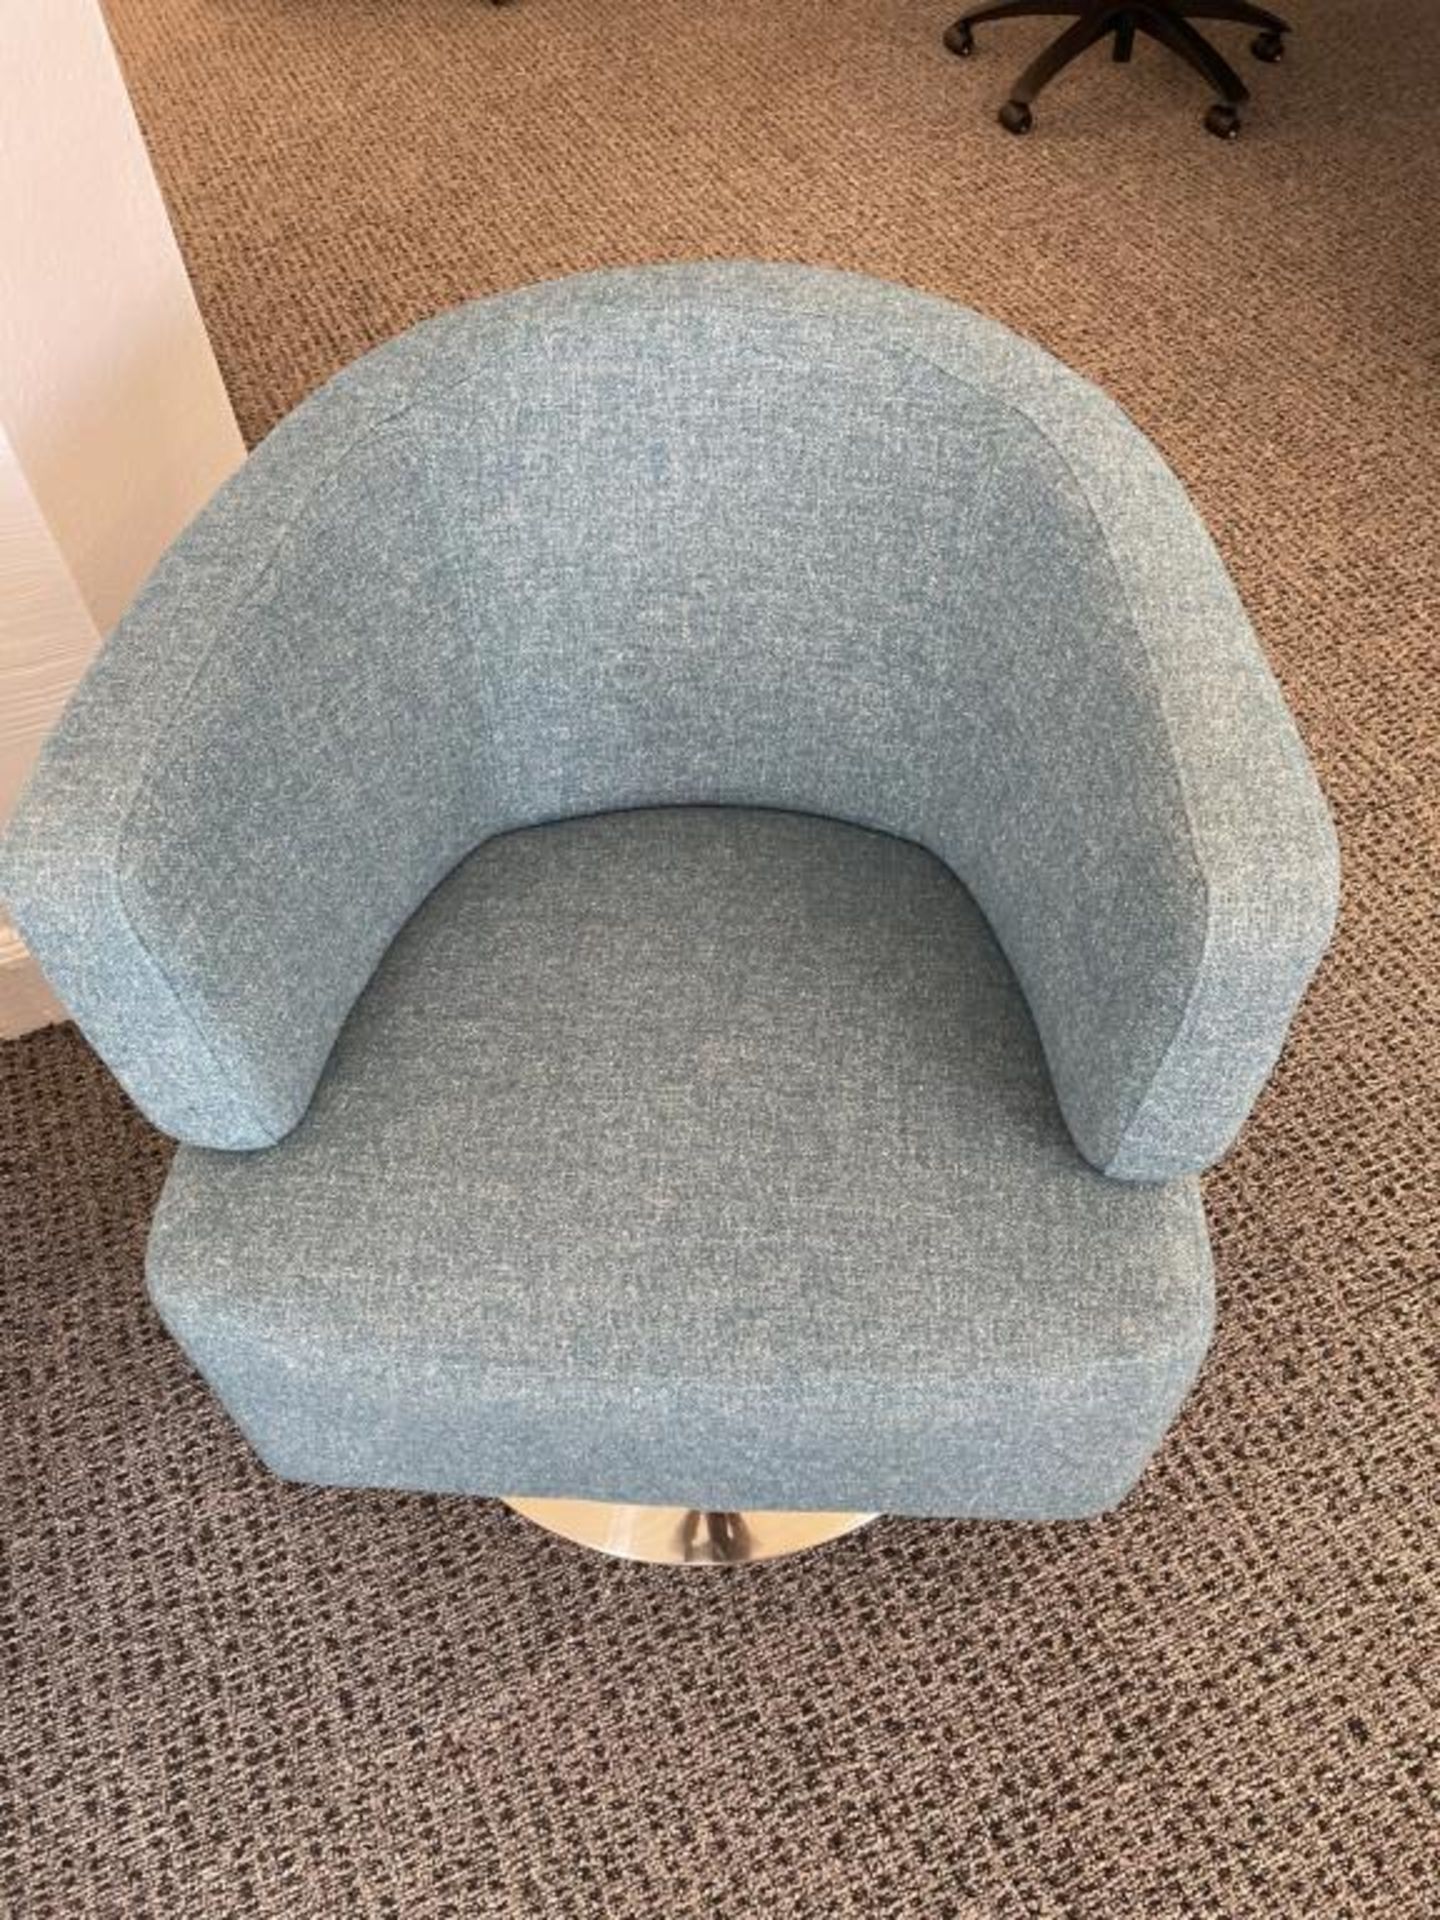 (2qty) Jason Furniture Teal Swivel Chairs - Image 4 of 6